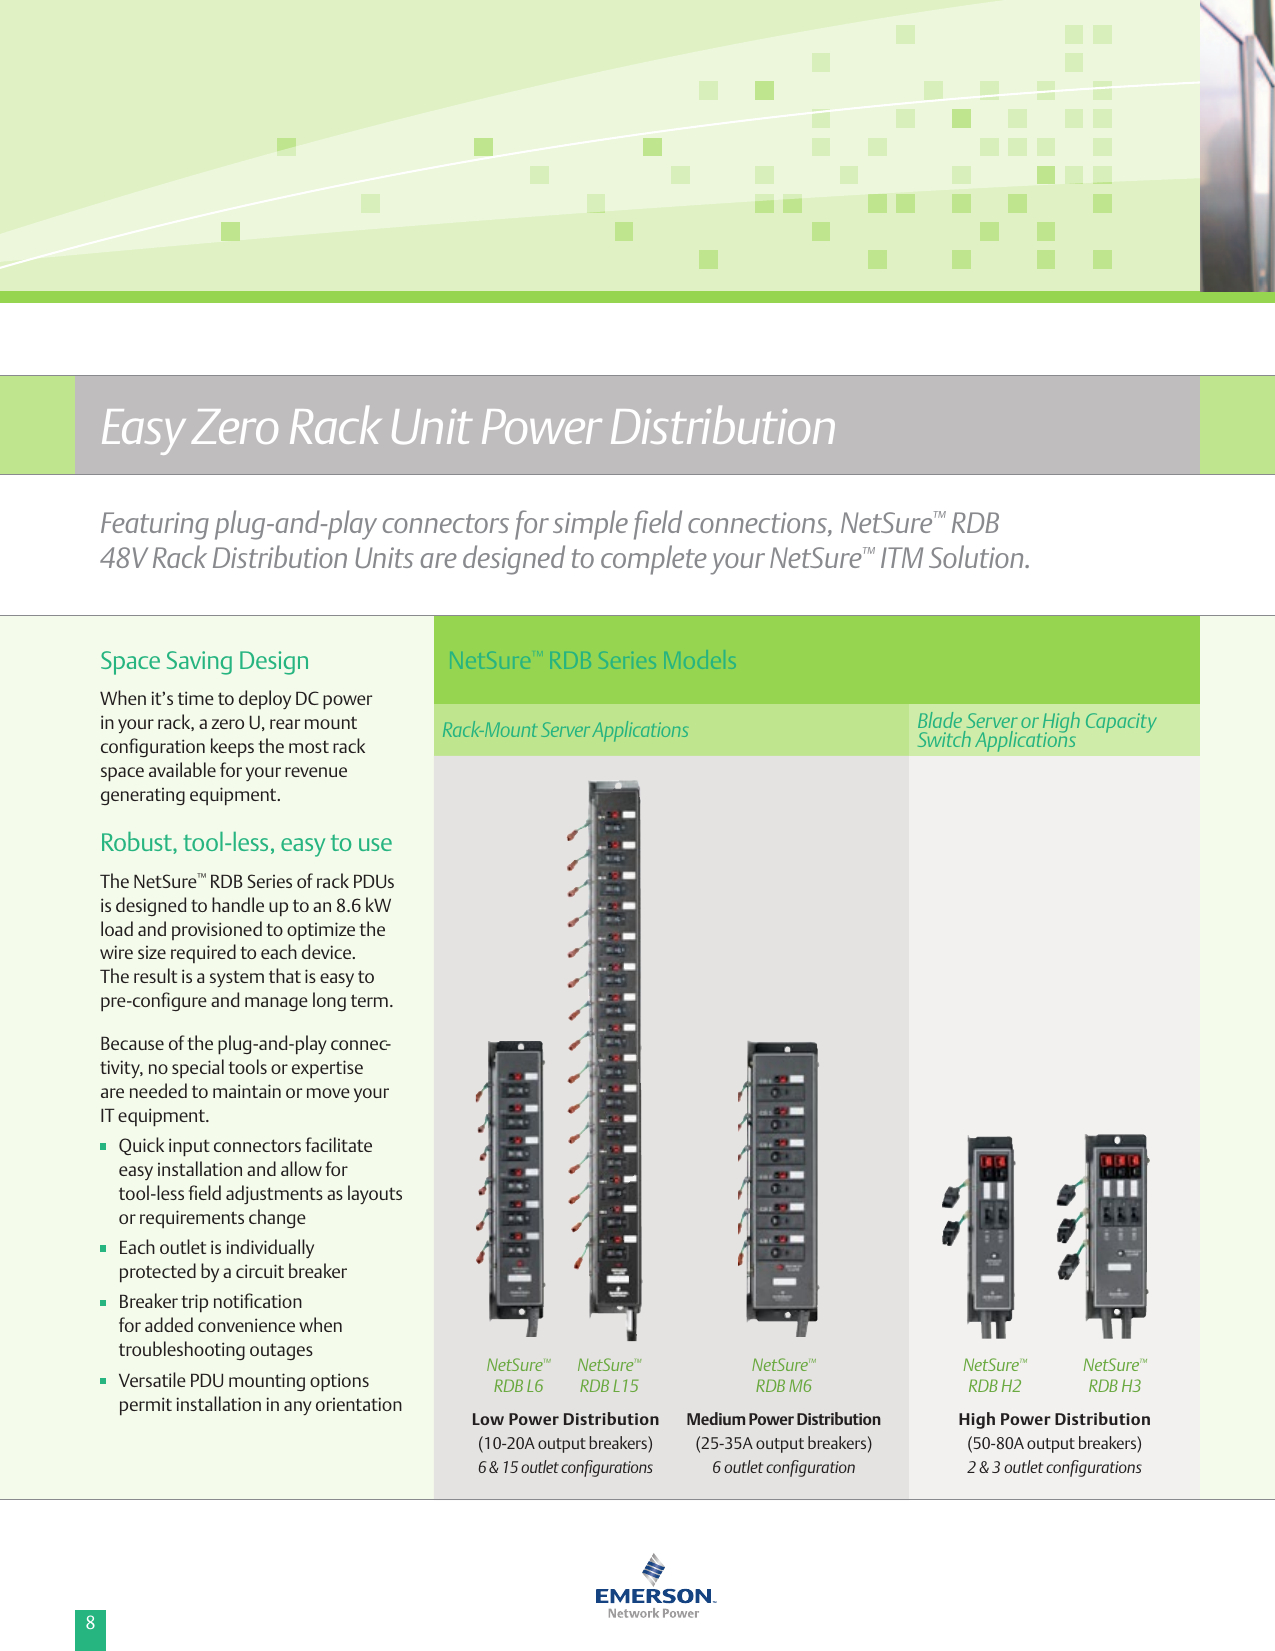 Page 8 of 12 - Emerson Emerson-Netsure-Itm-48-Vdc-Ups-70-Kw-To-280-Kw-Brochure-  Emerson-netsure-itm-48-vdc-ups-70-kw-to-280-kw-brochure